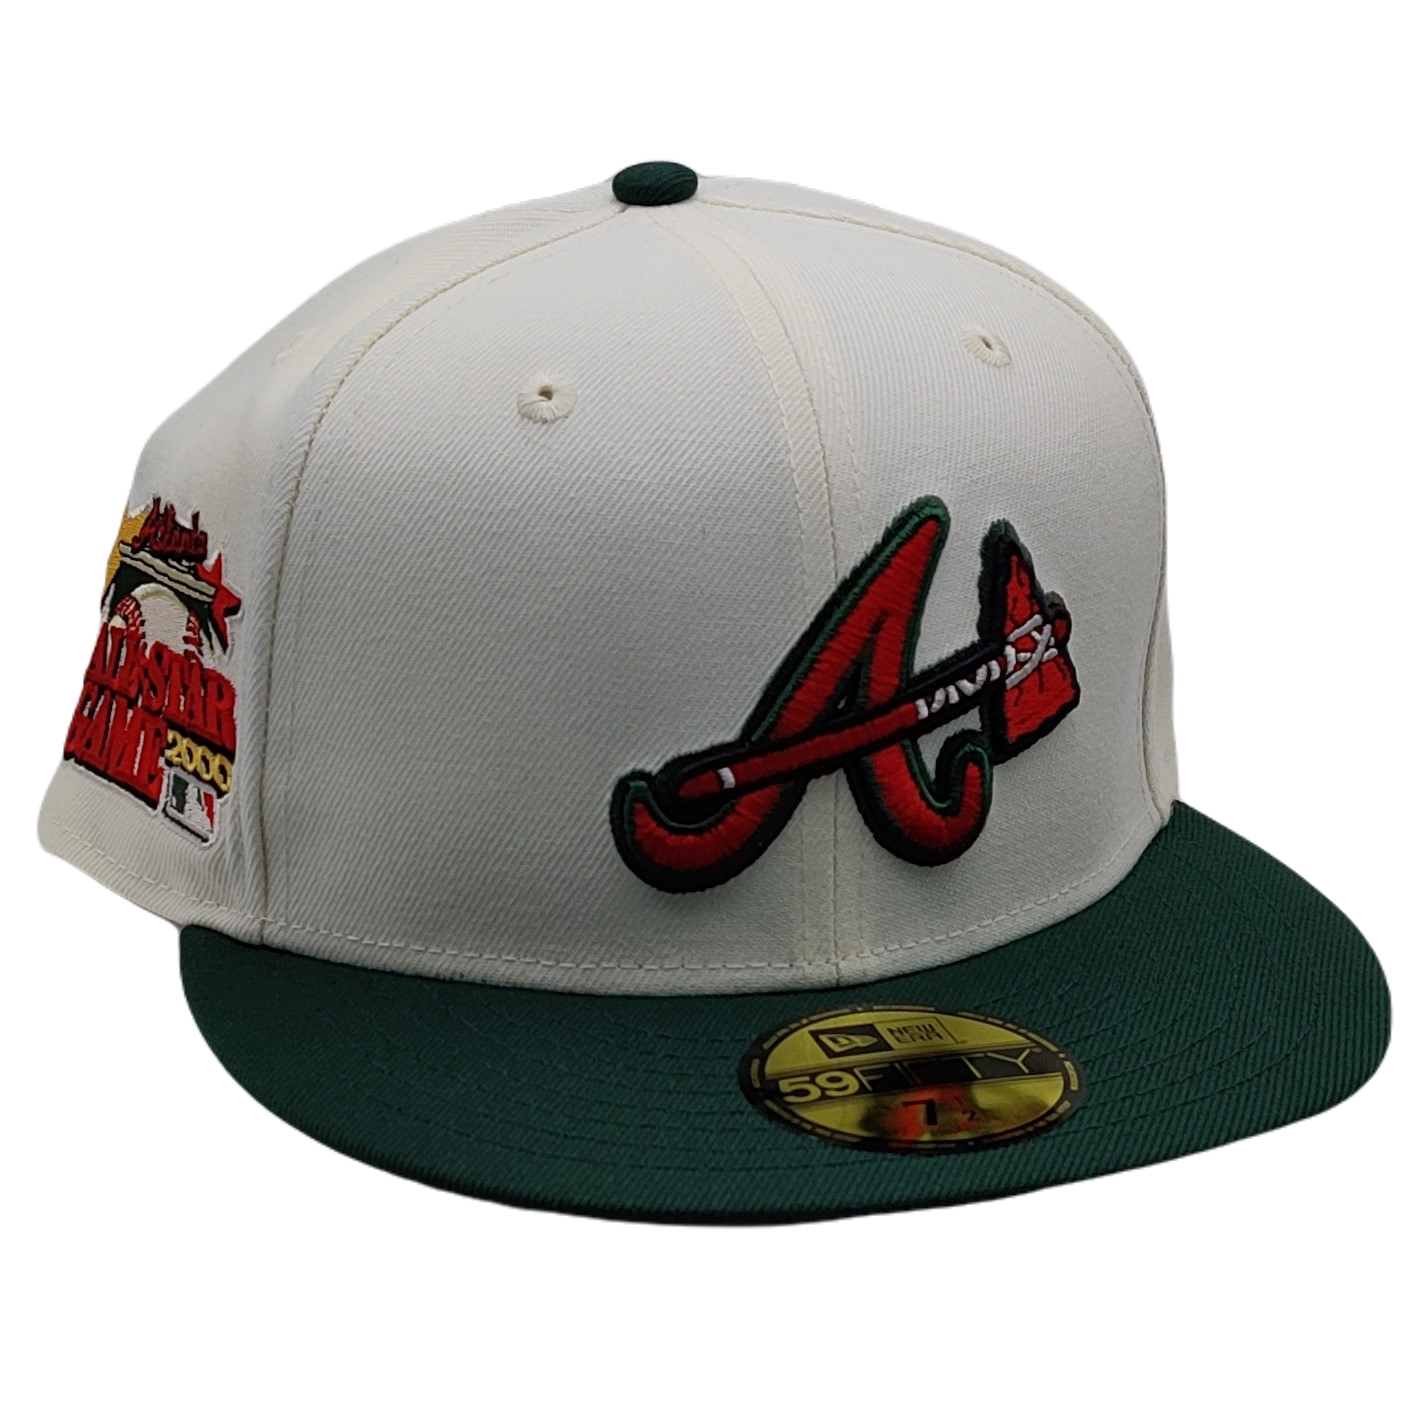 Atlanta Braves All Star Game 2000 Ice Edition Topperz New Era 59Fifty 7 1/8